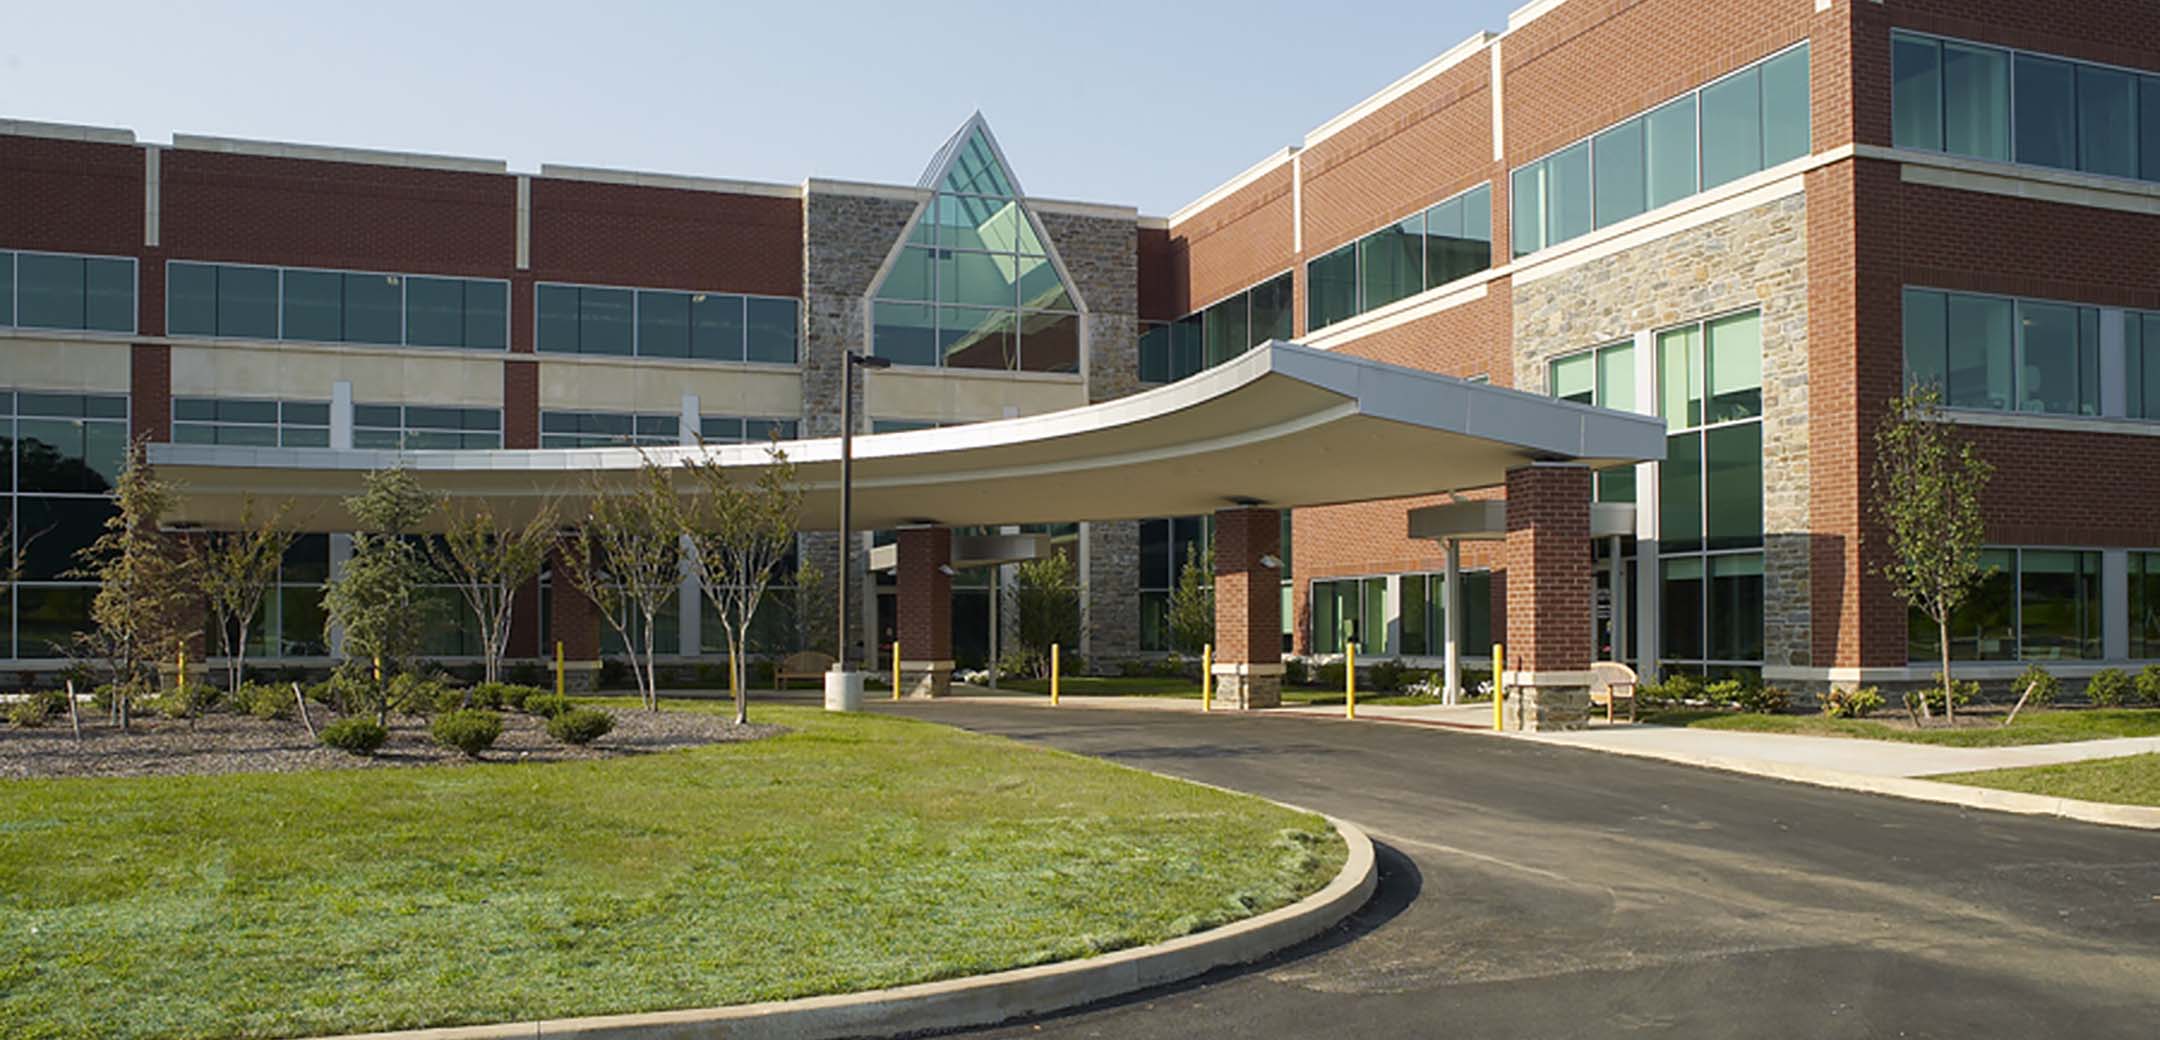 A view of the 3-story Main Line Health hospital from the front, showcasing the driveway leading up to the entrance and the grass lawn island Infront of it.